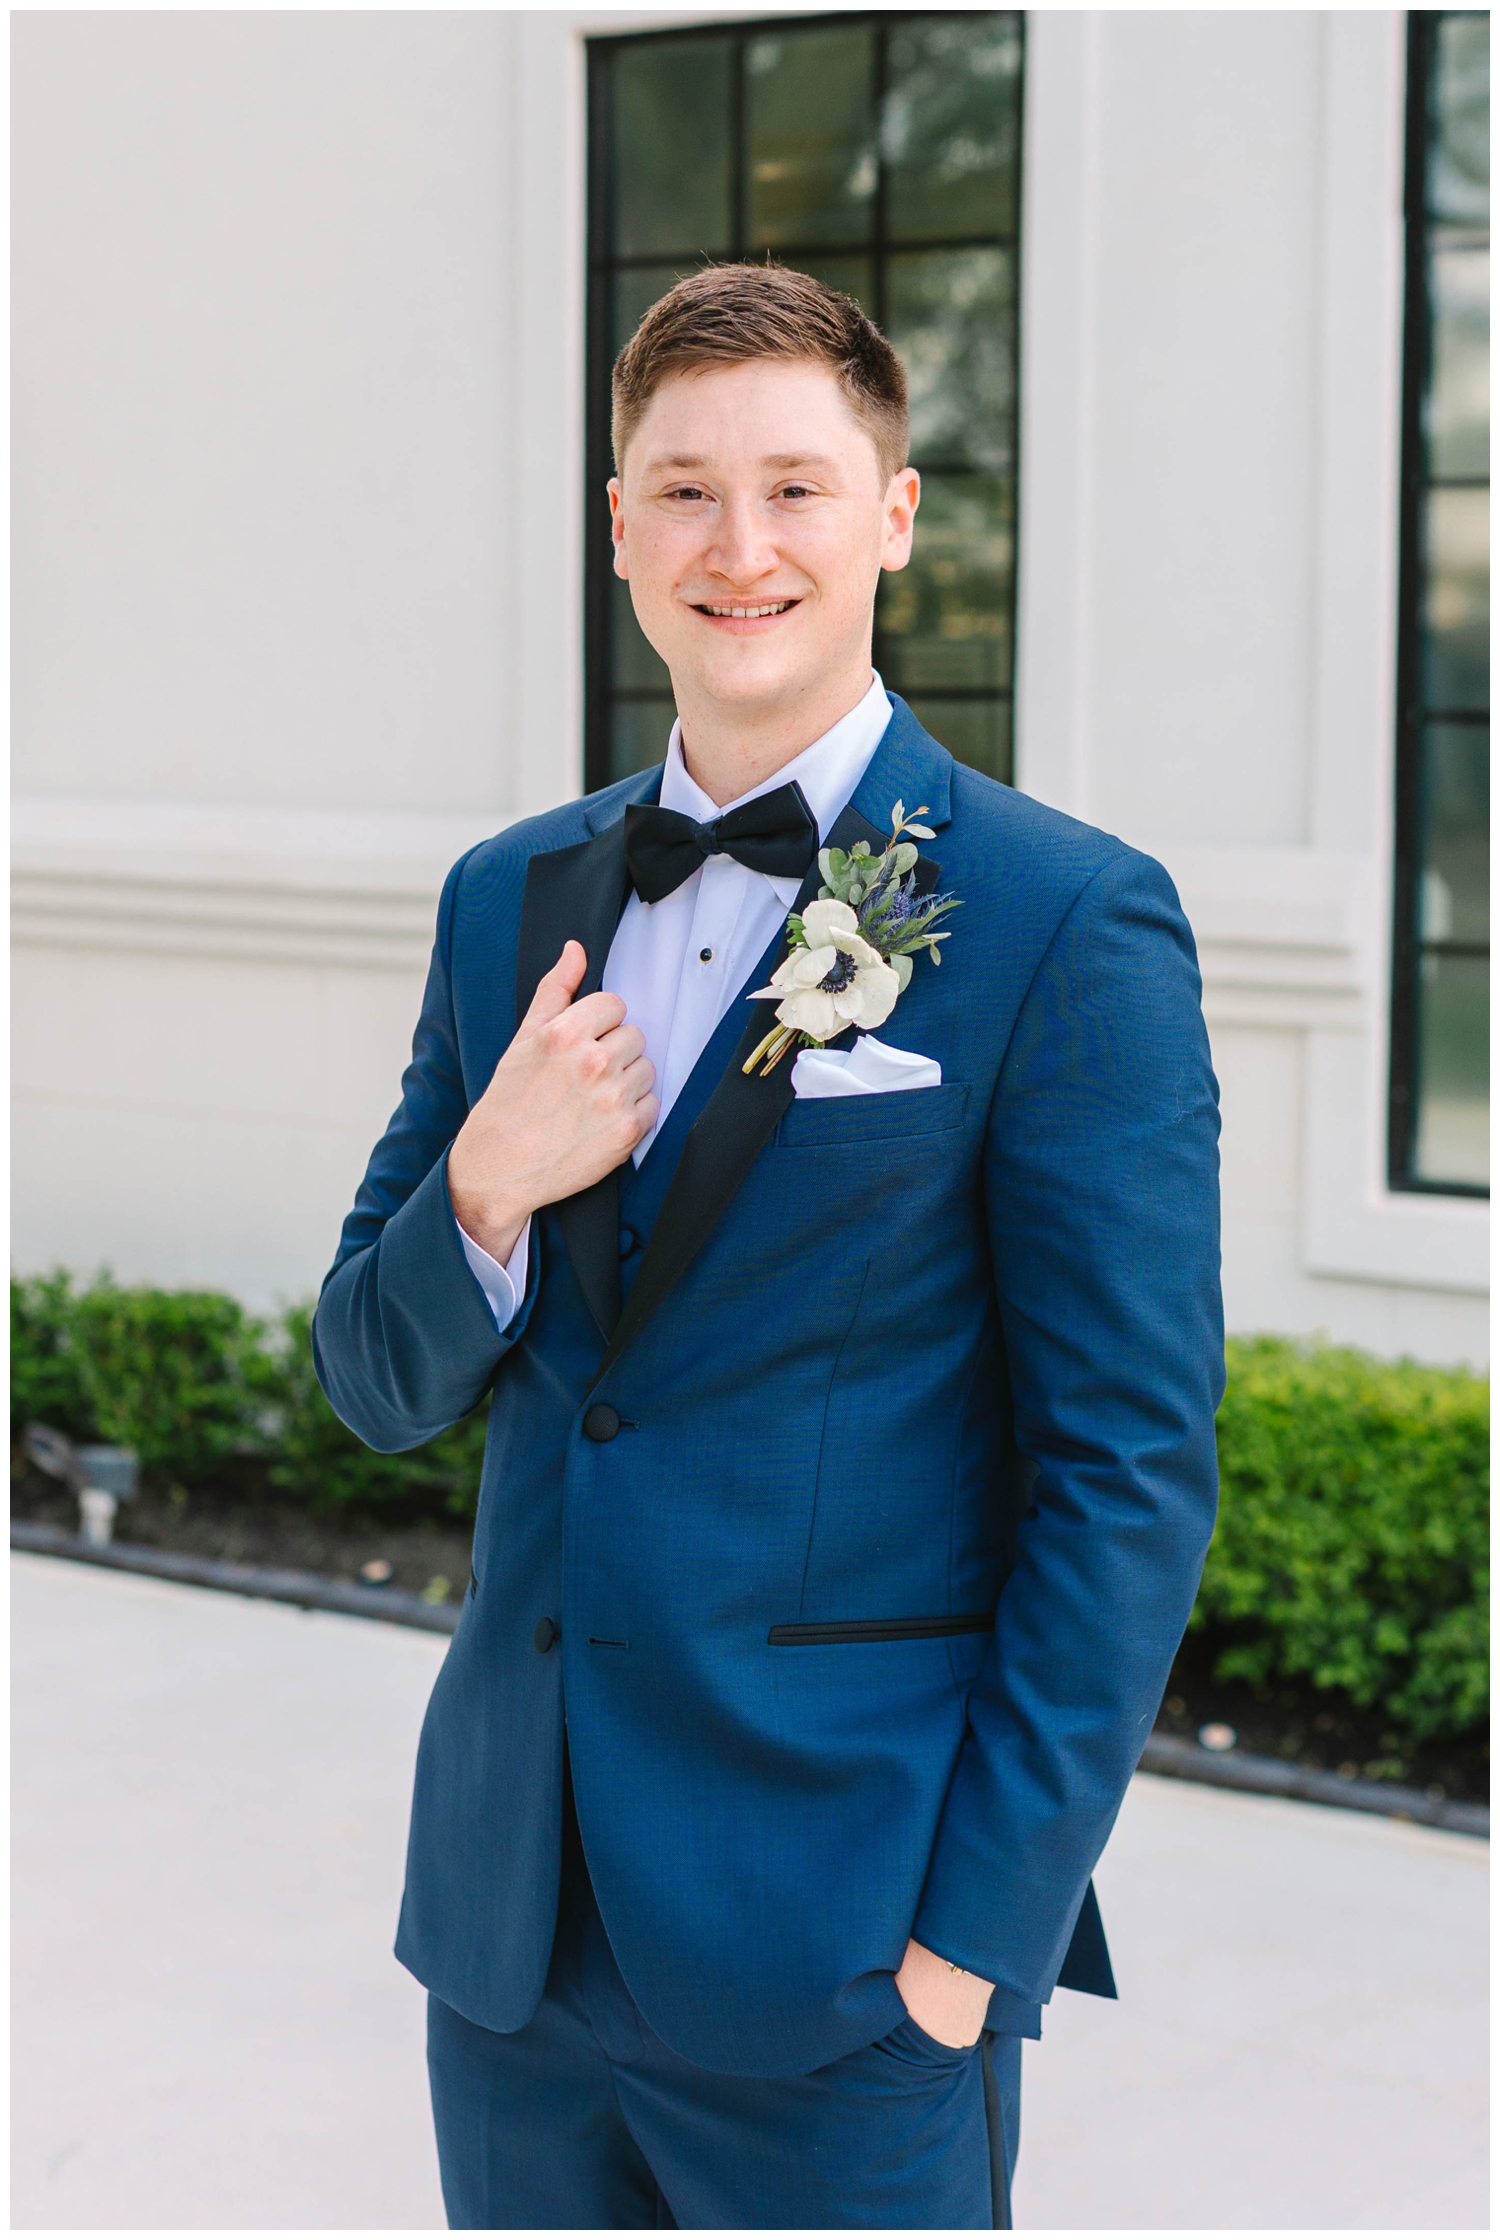 the groom smiling with hand on blue jacket and black bow tie